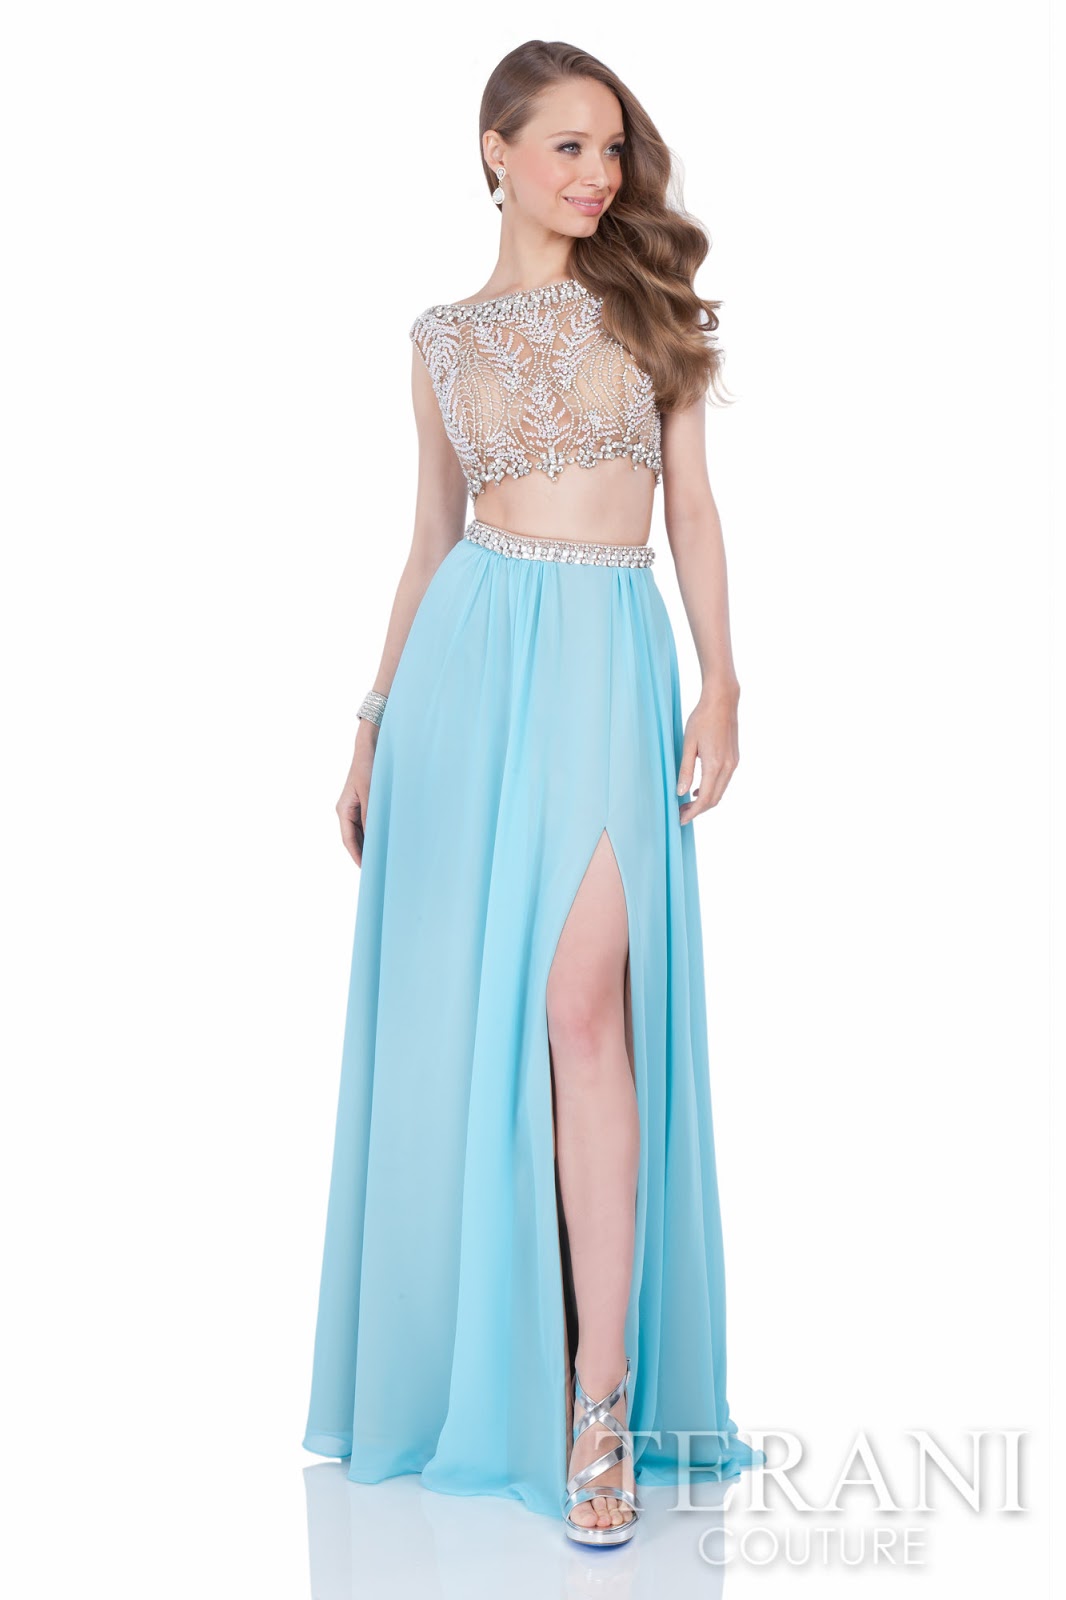 Prom 2016  New Arrivals Of Prom Dresses For Ladies By 